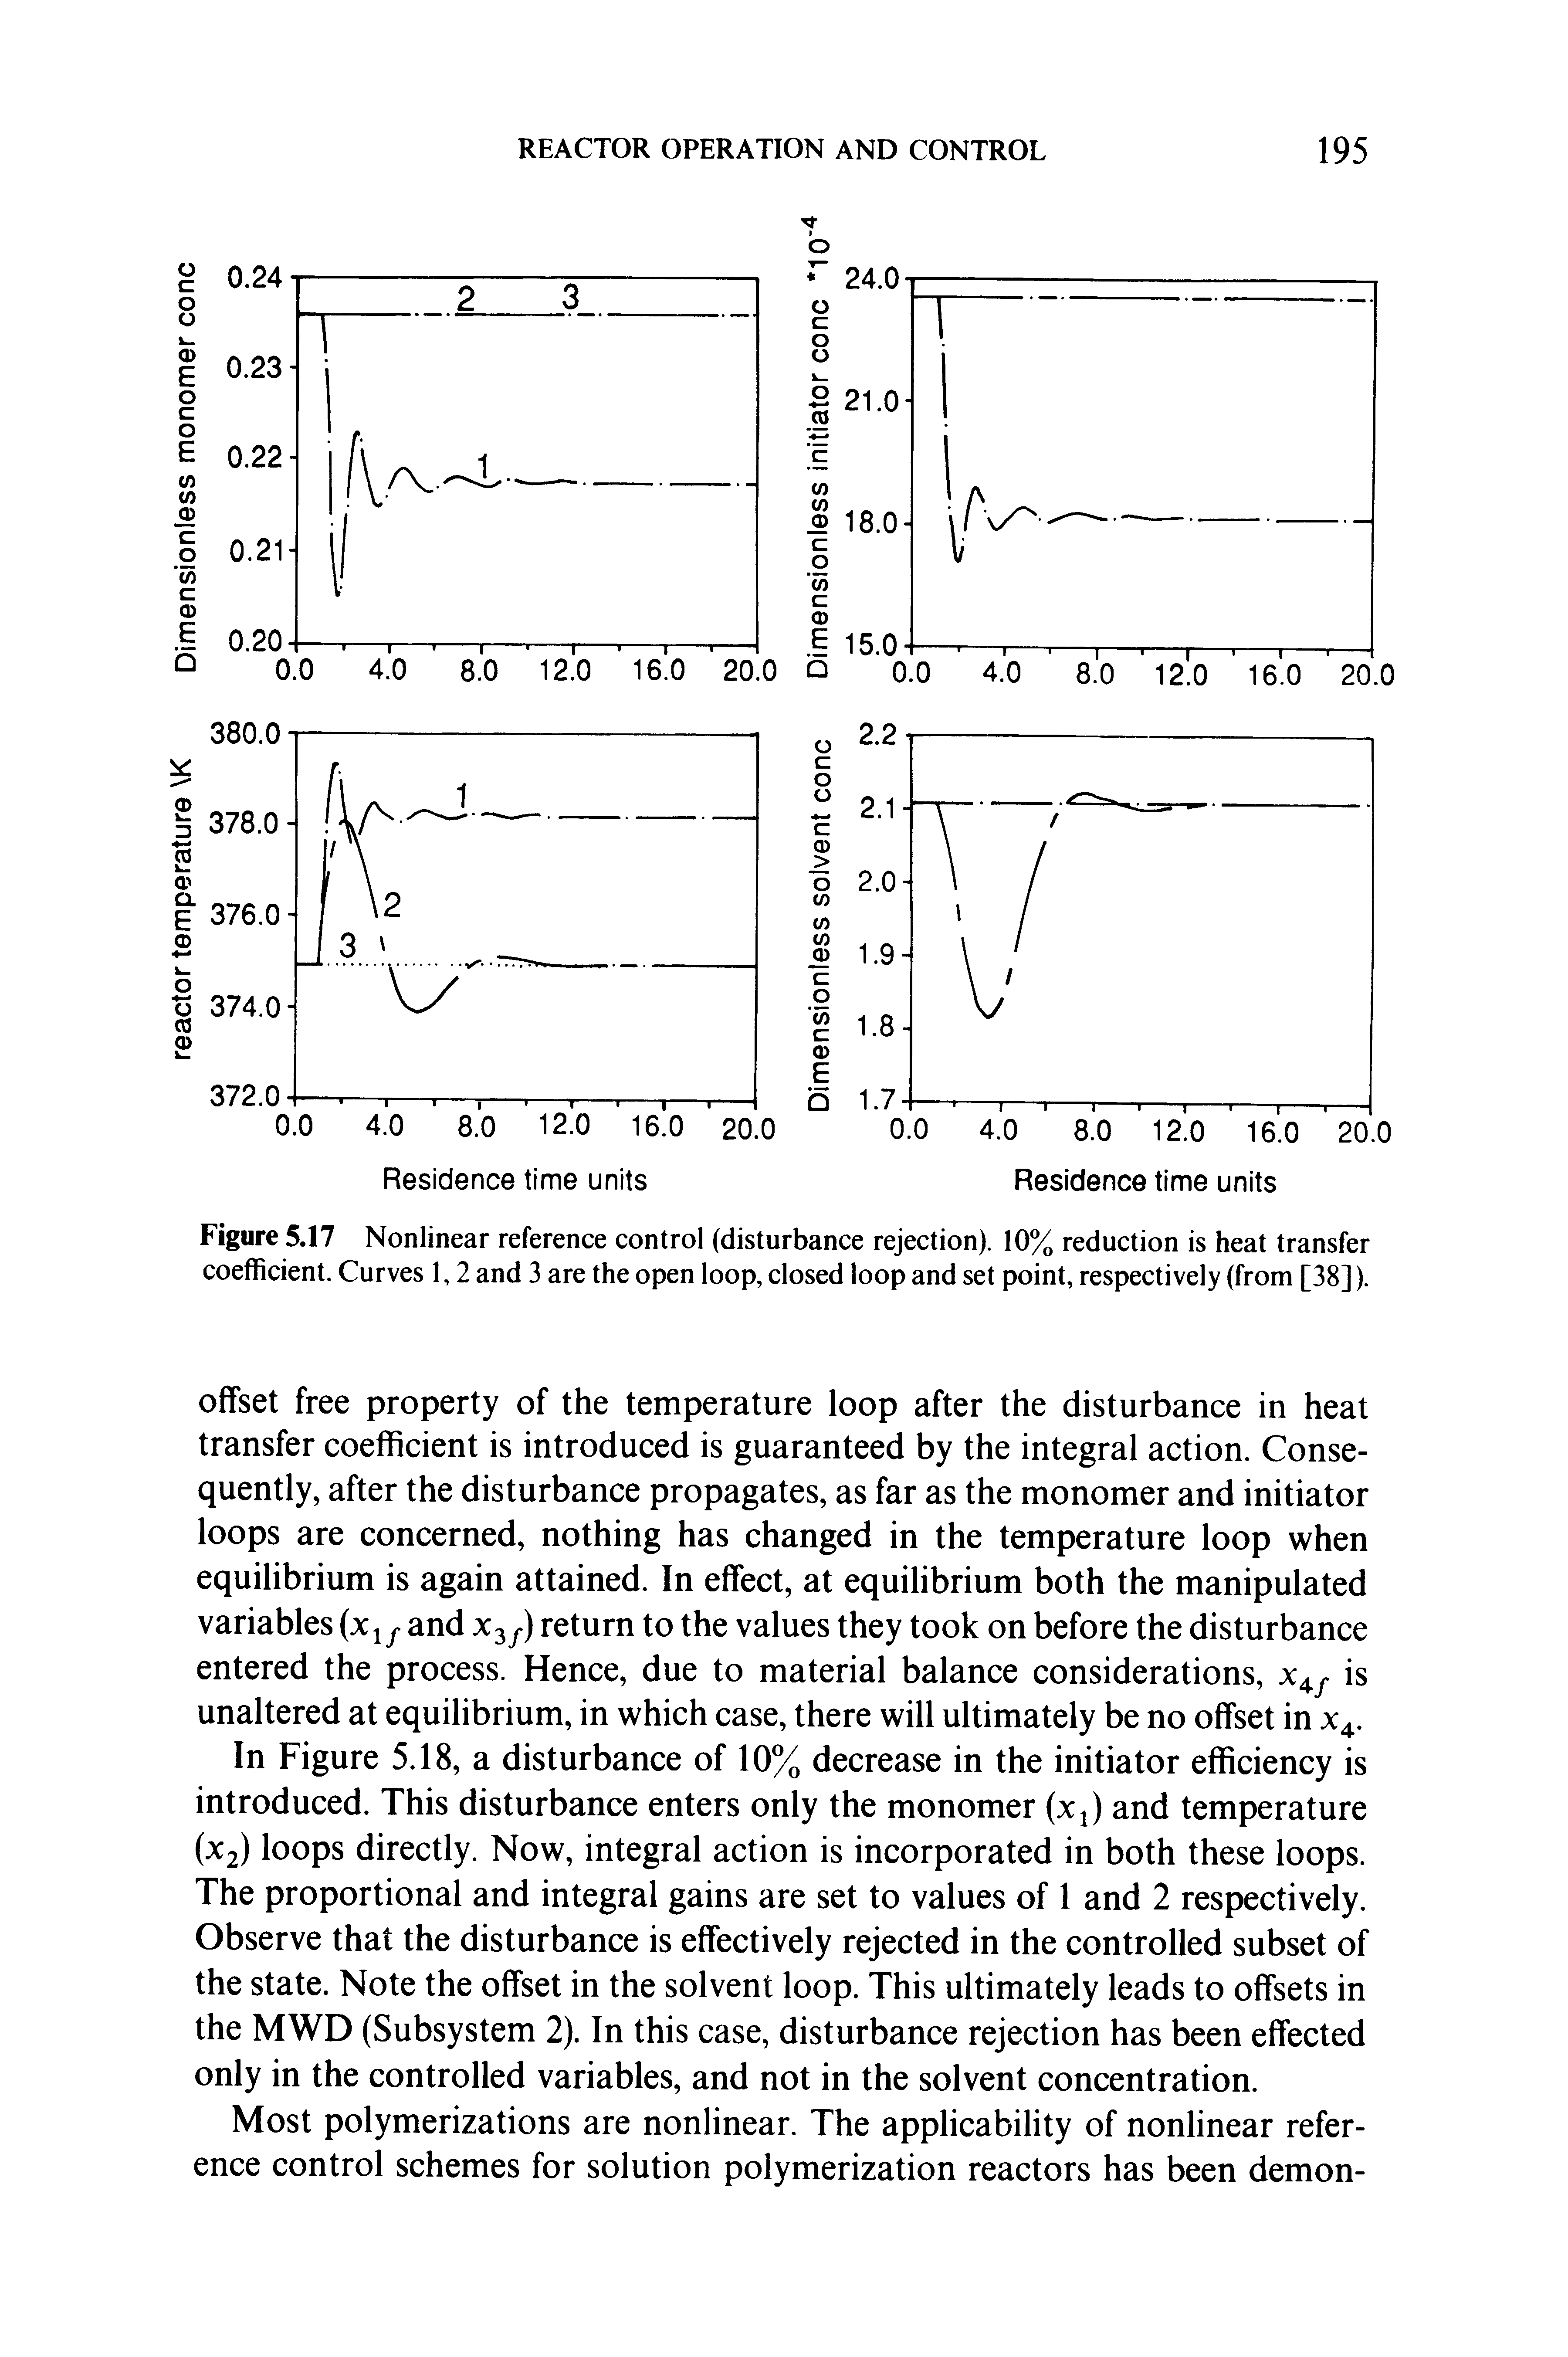 Figure 5.17 Nonlinear reference control (disturbance rejection). 10% reduction is heat transfer coefficient. Curves 1,2 and 3 are the open loop, closed loop and set point, respectively (from [38]).